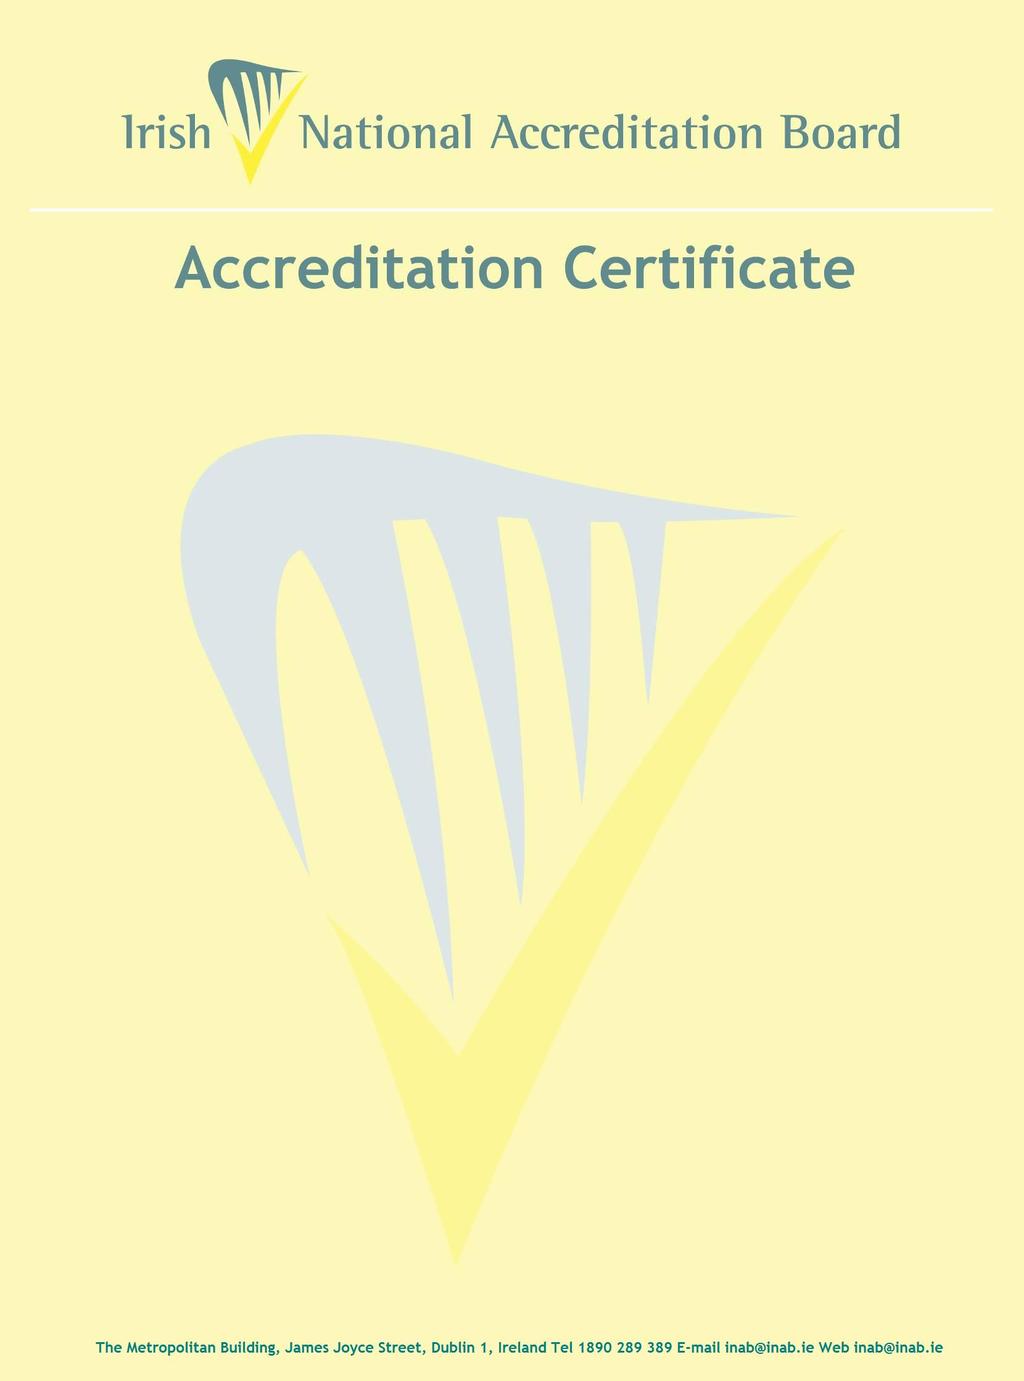 Tallaght Business Park, Whitestown, Dublin 24 Calibration Laboratory Registration number: 270C is accredited by the Irish National Board (INAB) to undertake calibration as detailed in the Schedule